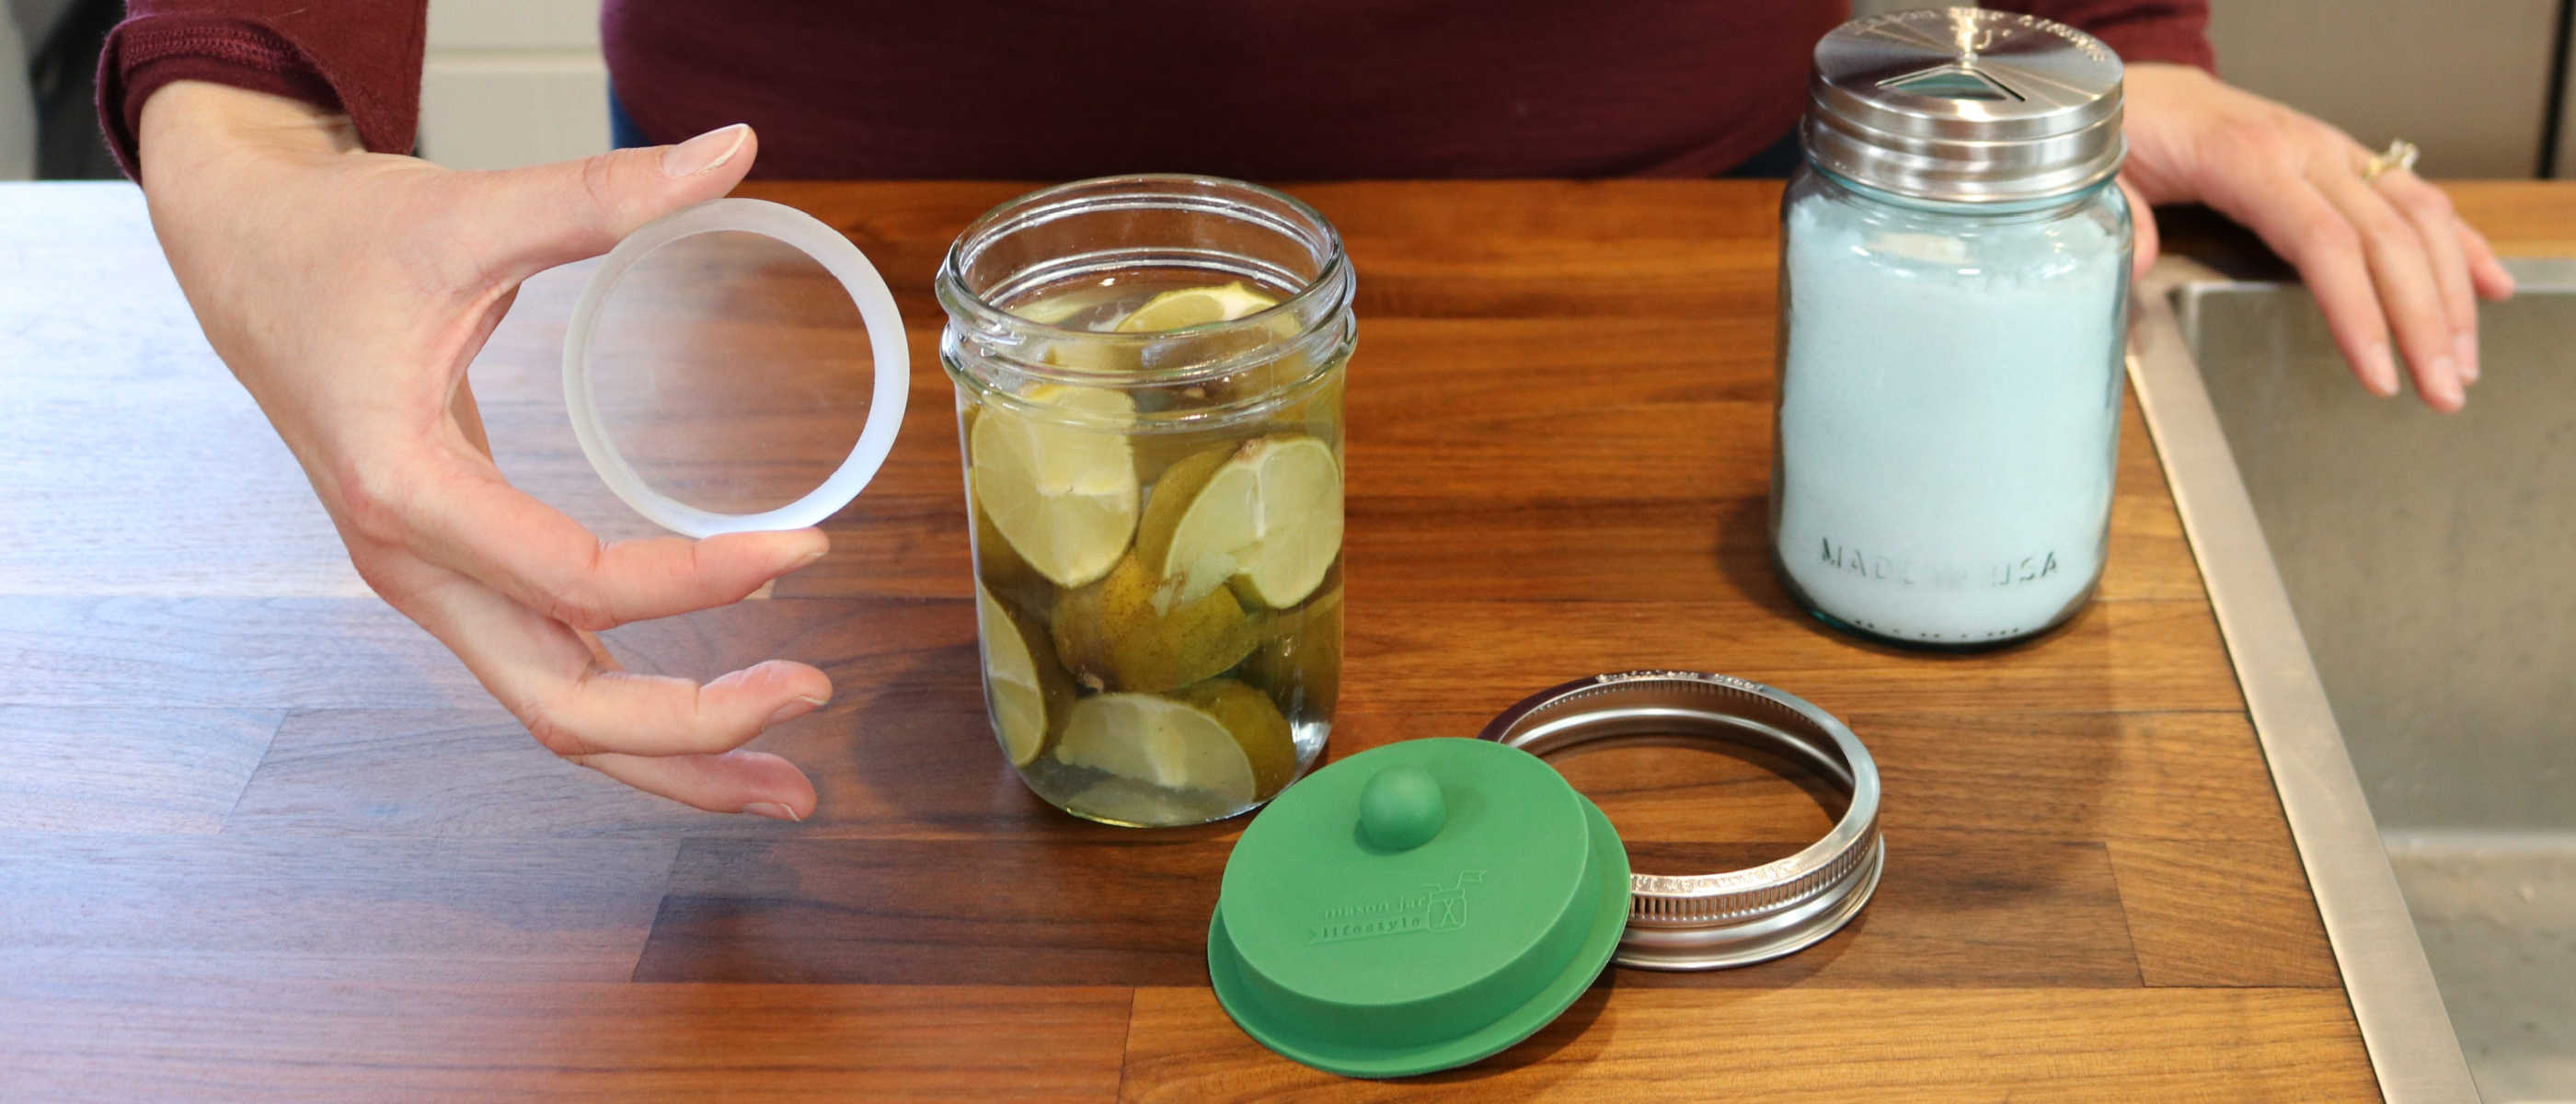 wide mouth fermentation lid kit with leaf green silicone valve lid, sanded glass weight and stainless steel band